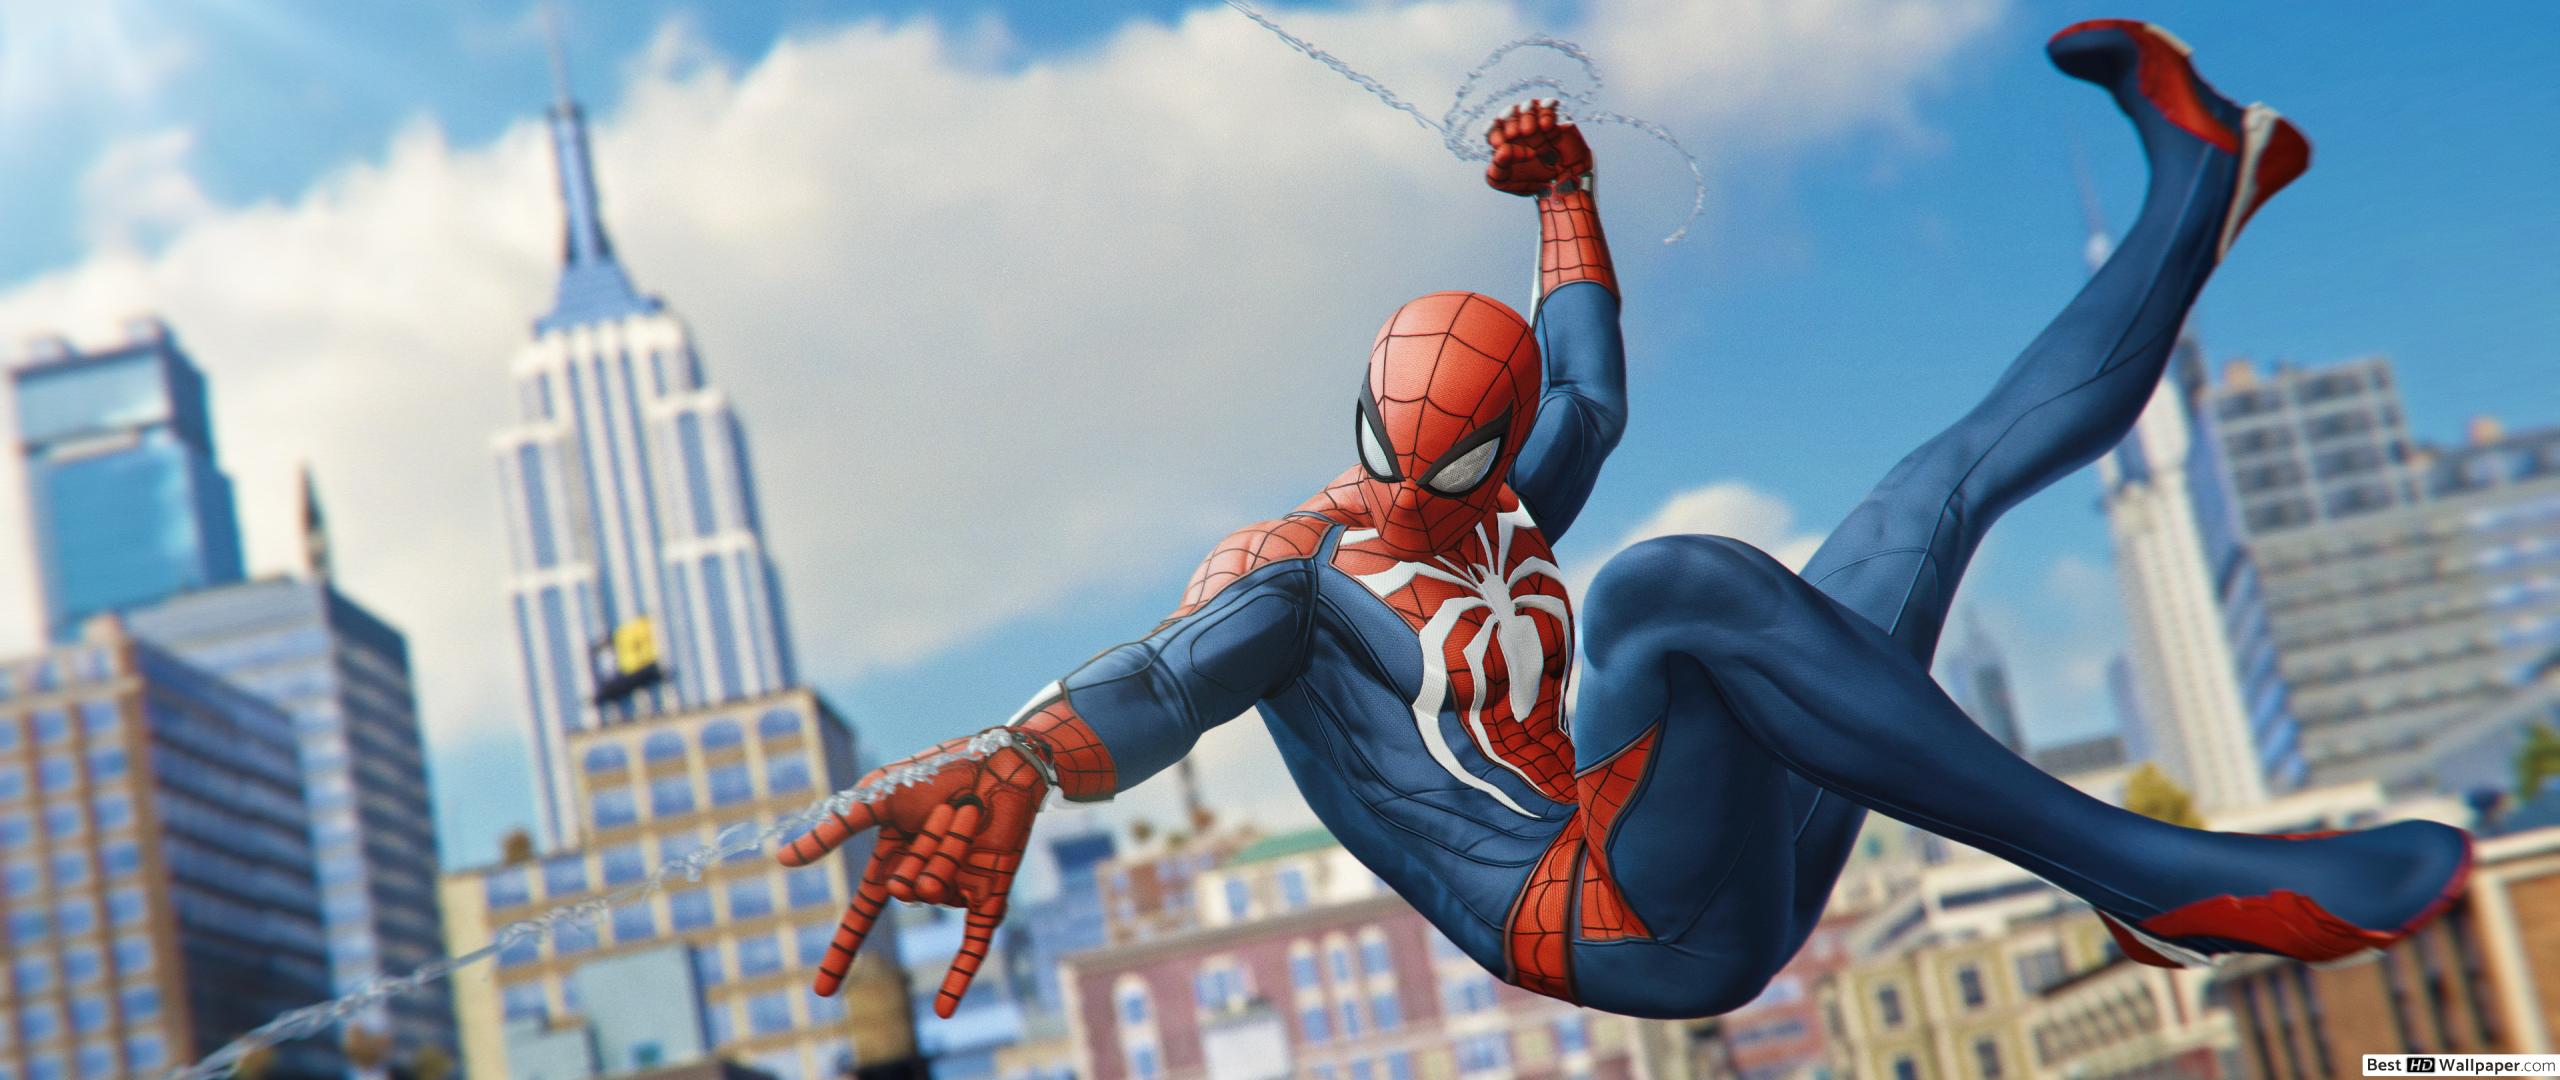 Spider Man Game (2018) In New York City HD Wallpaper Download